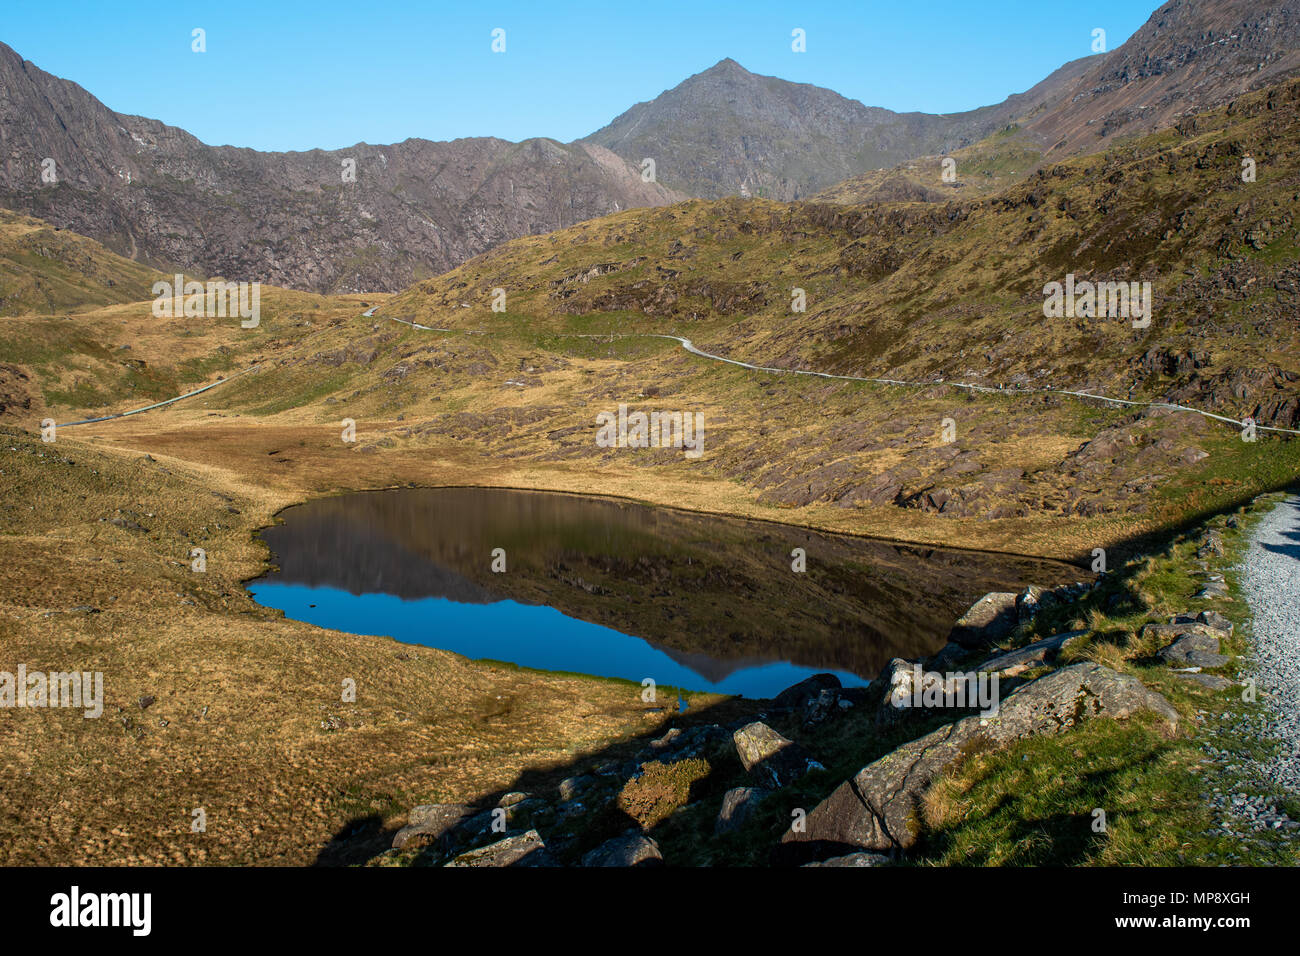 A morning on the Snowdon Miners Track in the Snowdonia National Park. shoot from near the start of the track looking up at the peak  of Snowdon. Stock Photo